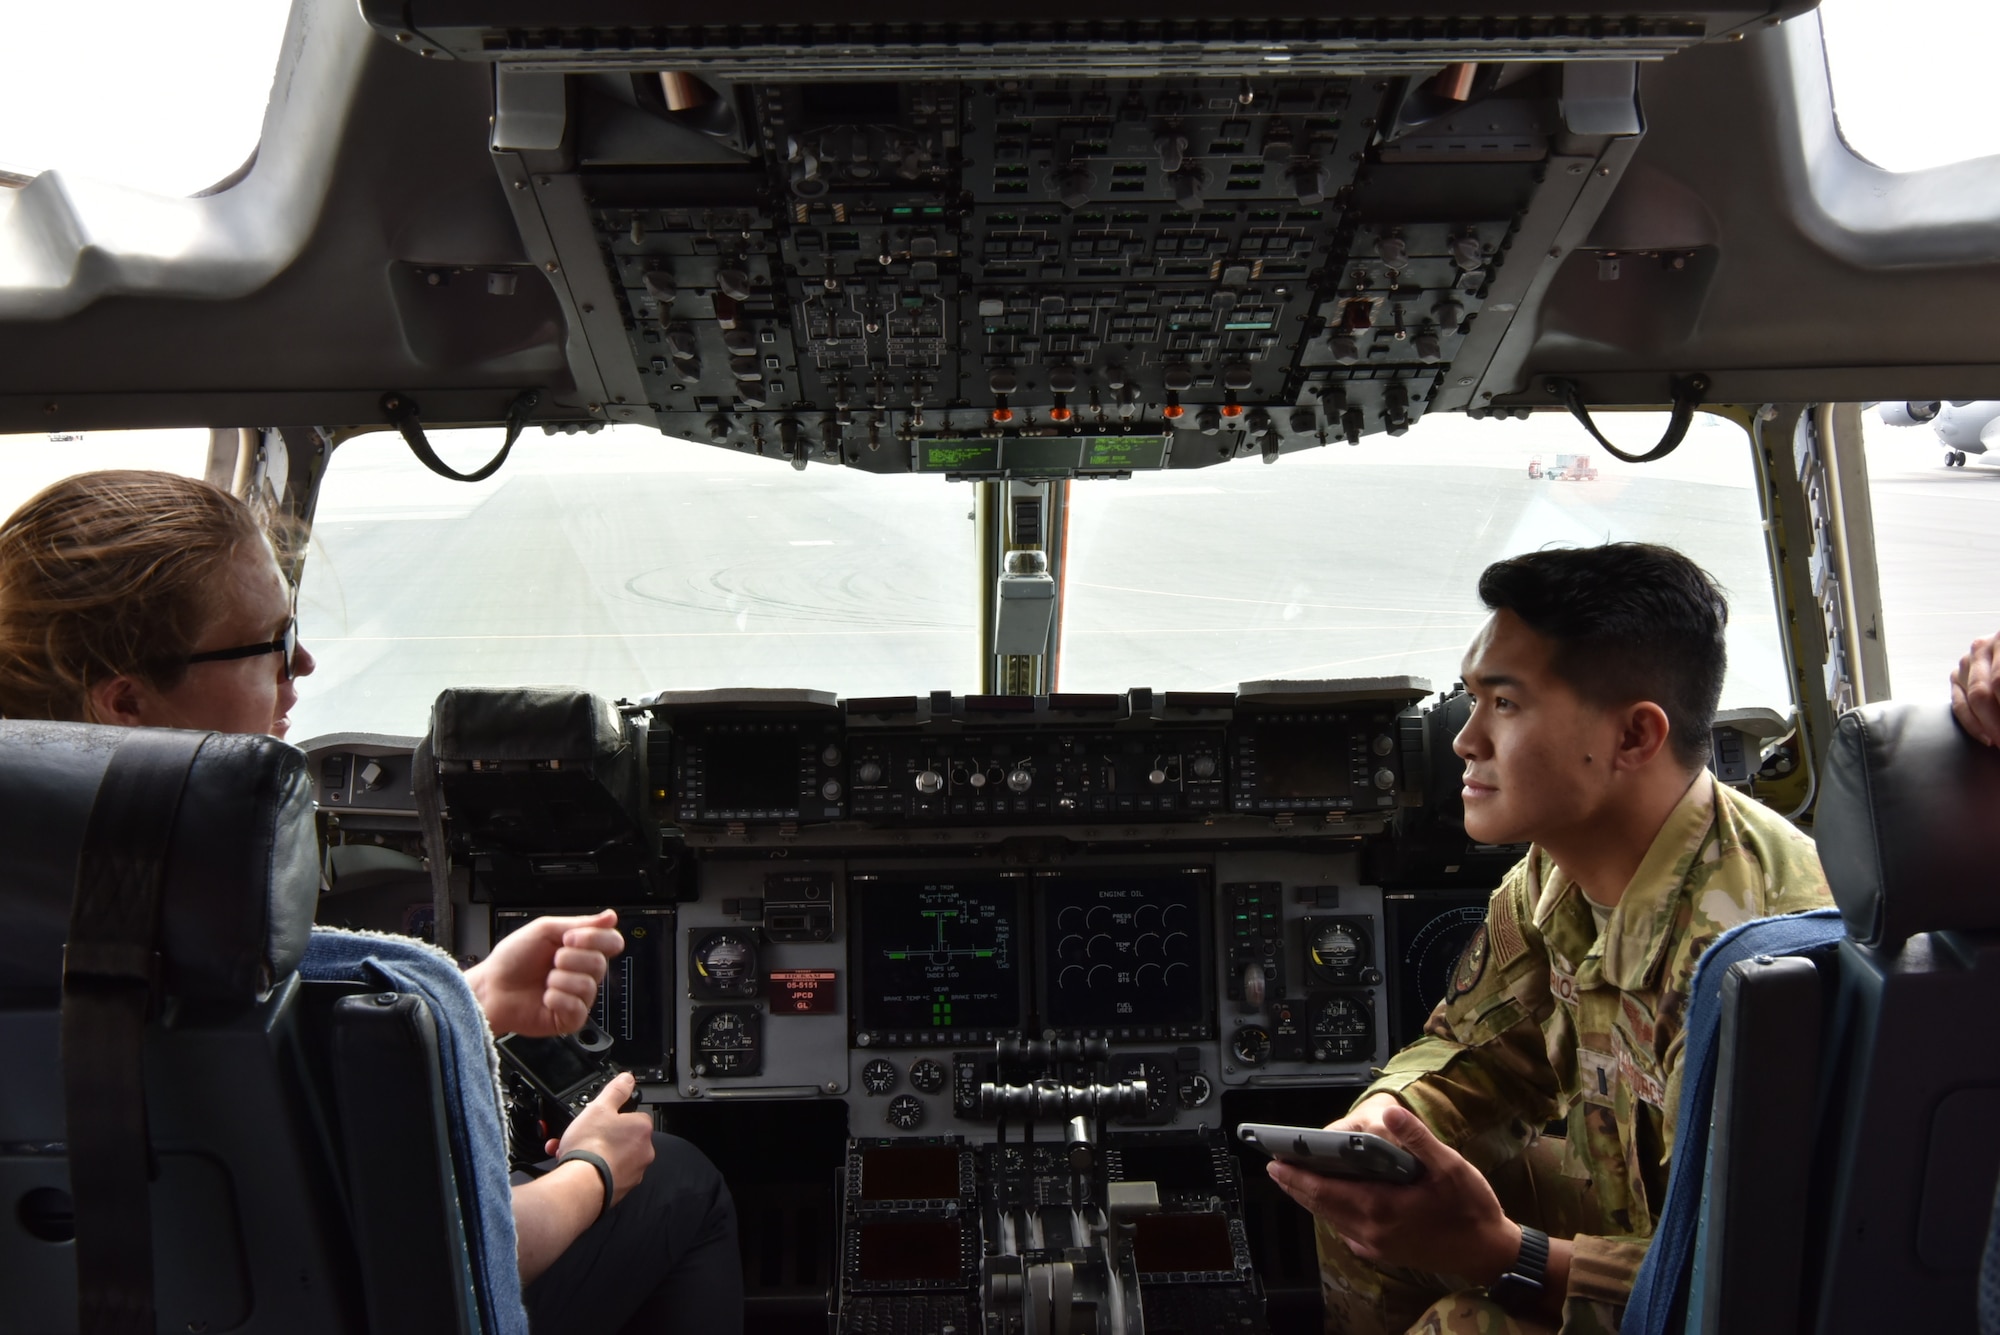 A student from the Massachusetts Institute of Technology Security Studies Program talks with 1st Lt. Ralph Andrew Carios, 535th Airlift Squadron pilot, about the role of the 535th AS in the Air Force’s mission at Joint Base Pearl Harbor-Hickam, Hawaii, March 23, 2022. Students visited JBPHH as part of a tour of military commands on the island of Oahu to learn about the Department of Defense’s role in ensuring a free and open Indo-Pacific. (U.S. Air Force photo by 1st Lt. Benjamin Aronson)